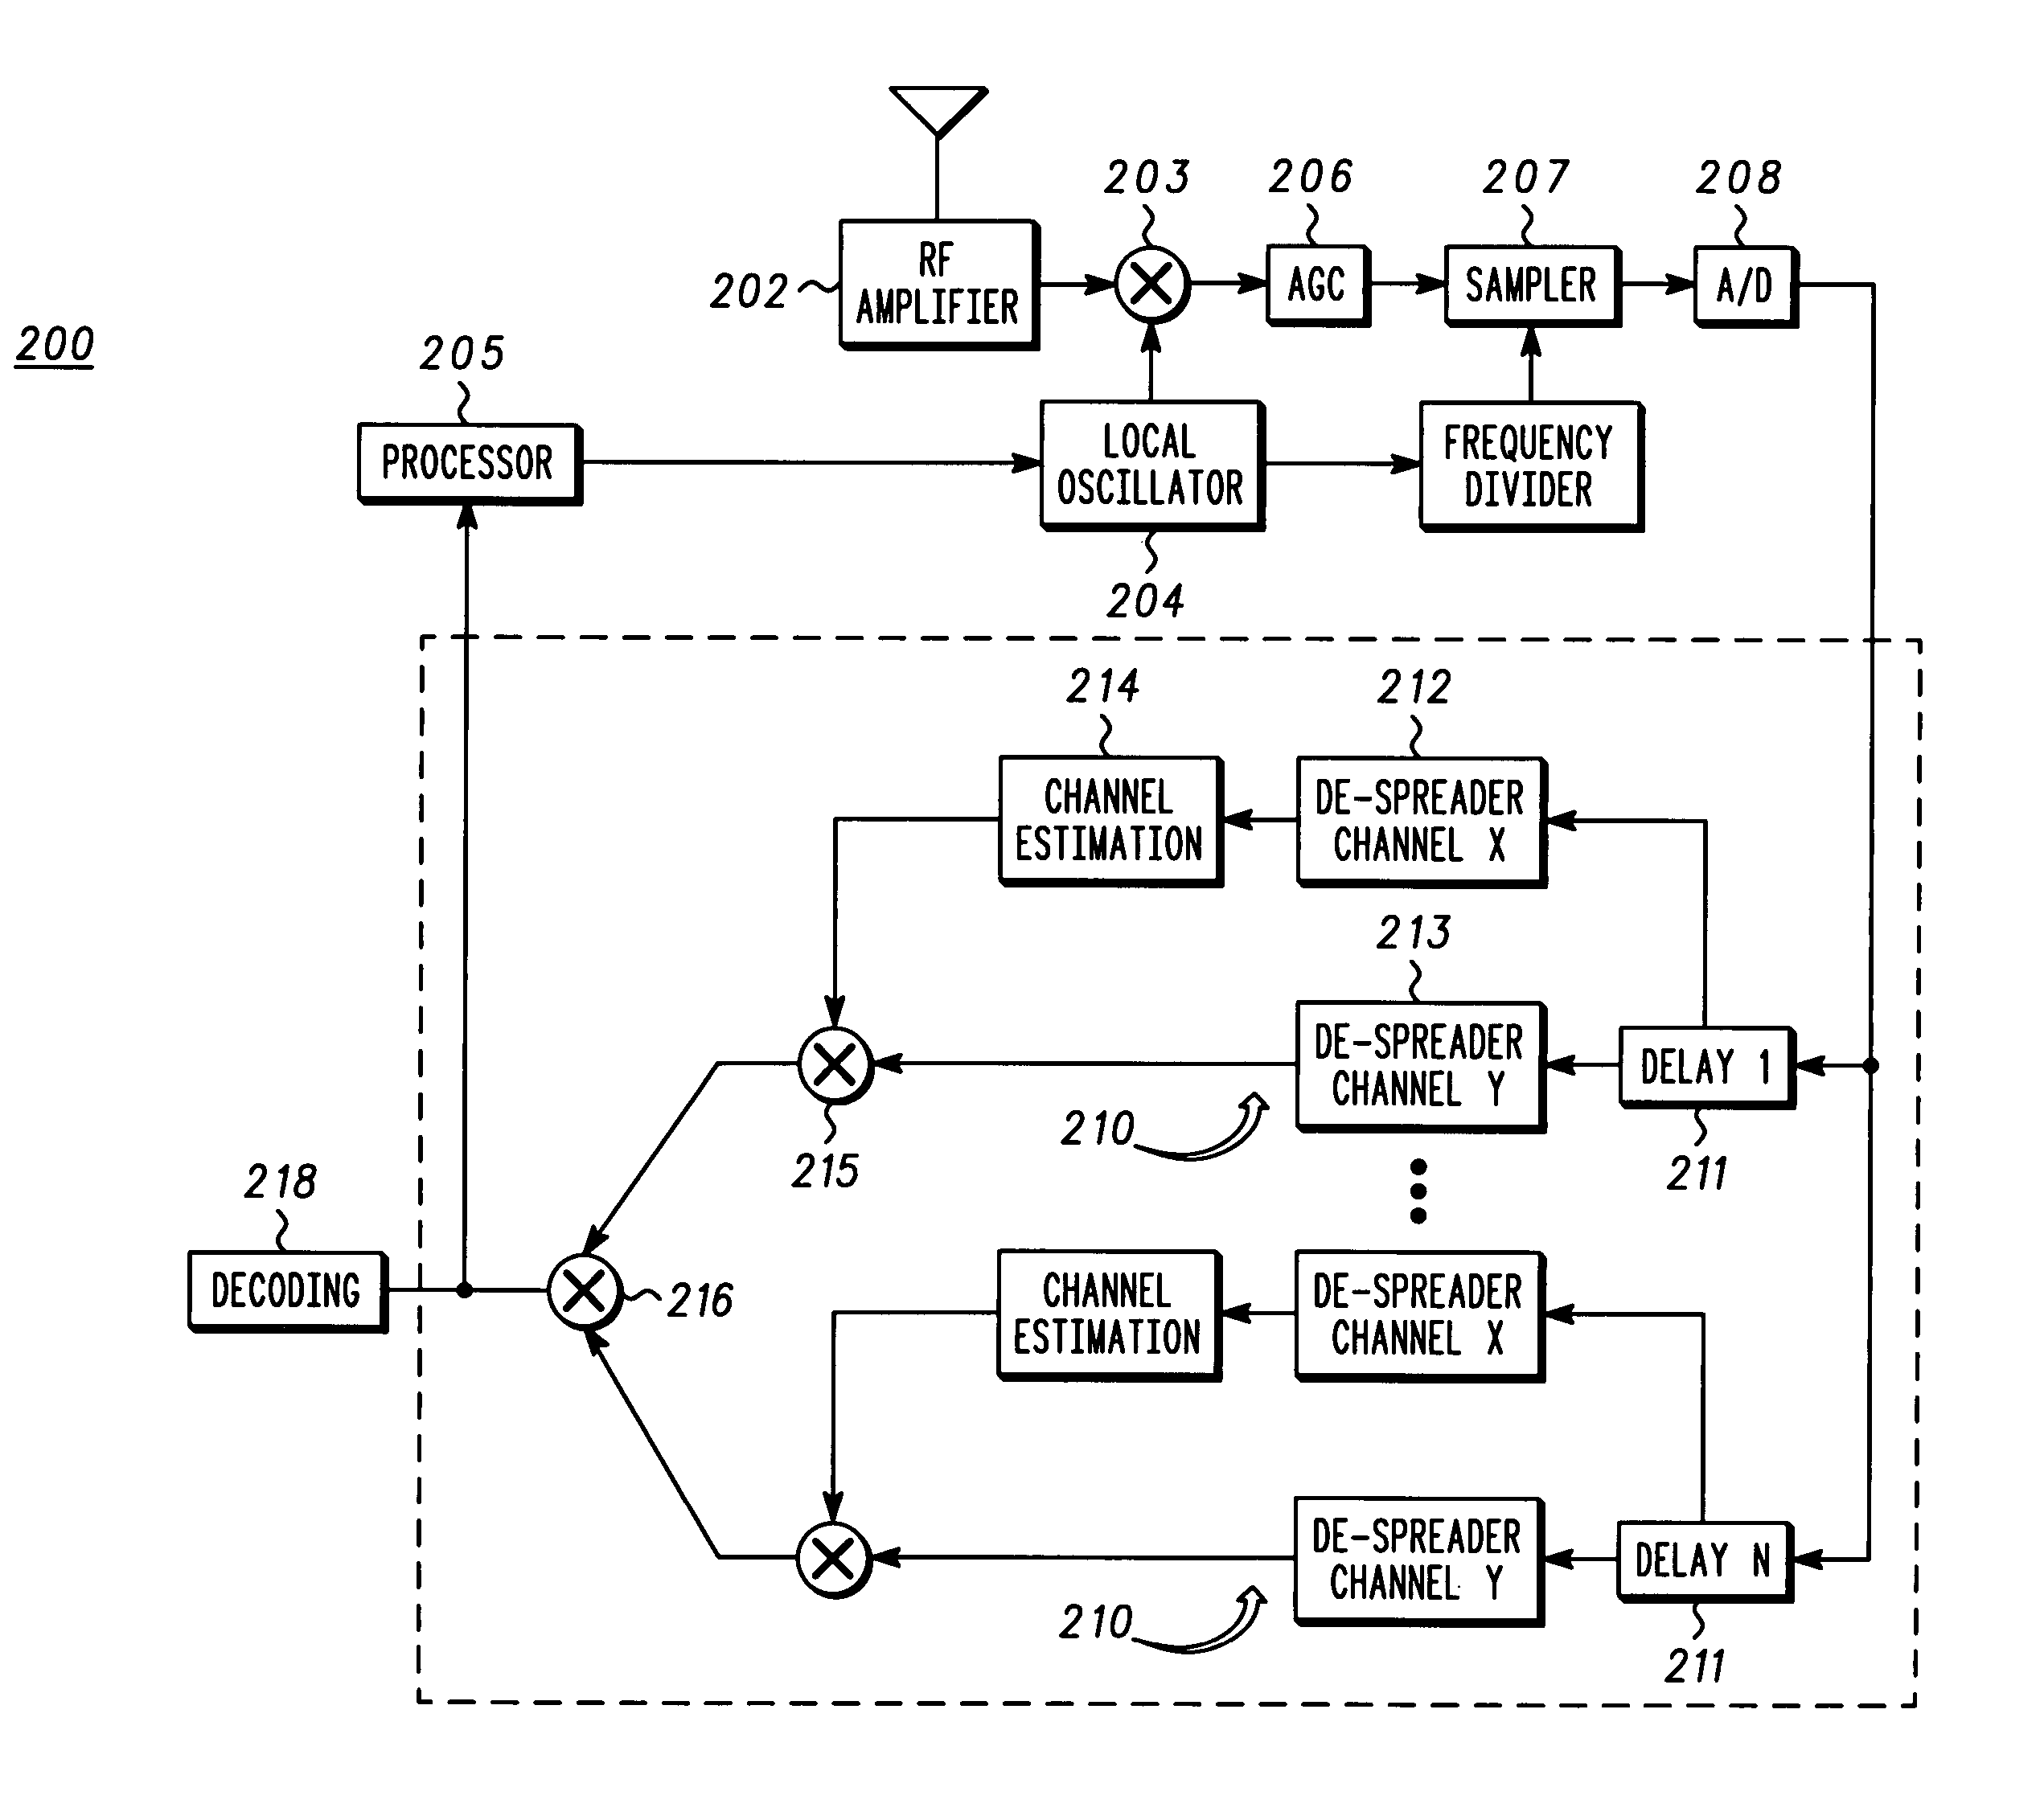 Downlink power control in wireless communications networks and methods